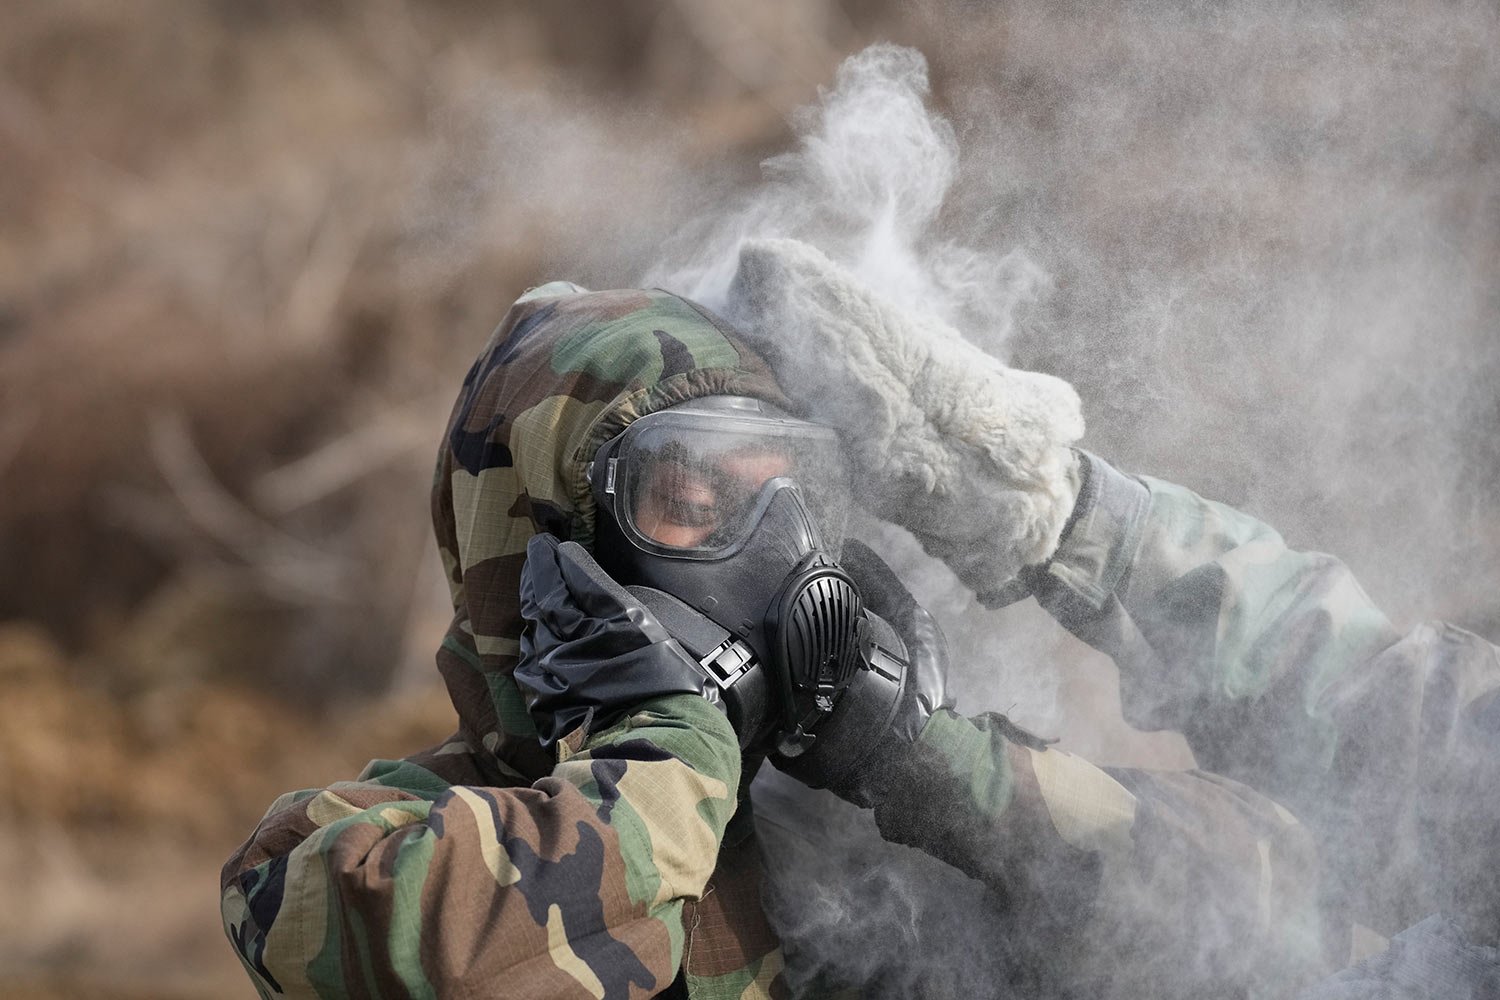  U.S. soldiers try to remove mock chemical pollutants during a joint military drill between South Korea and the United States in Paju, South Korea, Thursday, March 16, 2023.  (AP Photo/Lee Jin-man) 